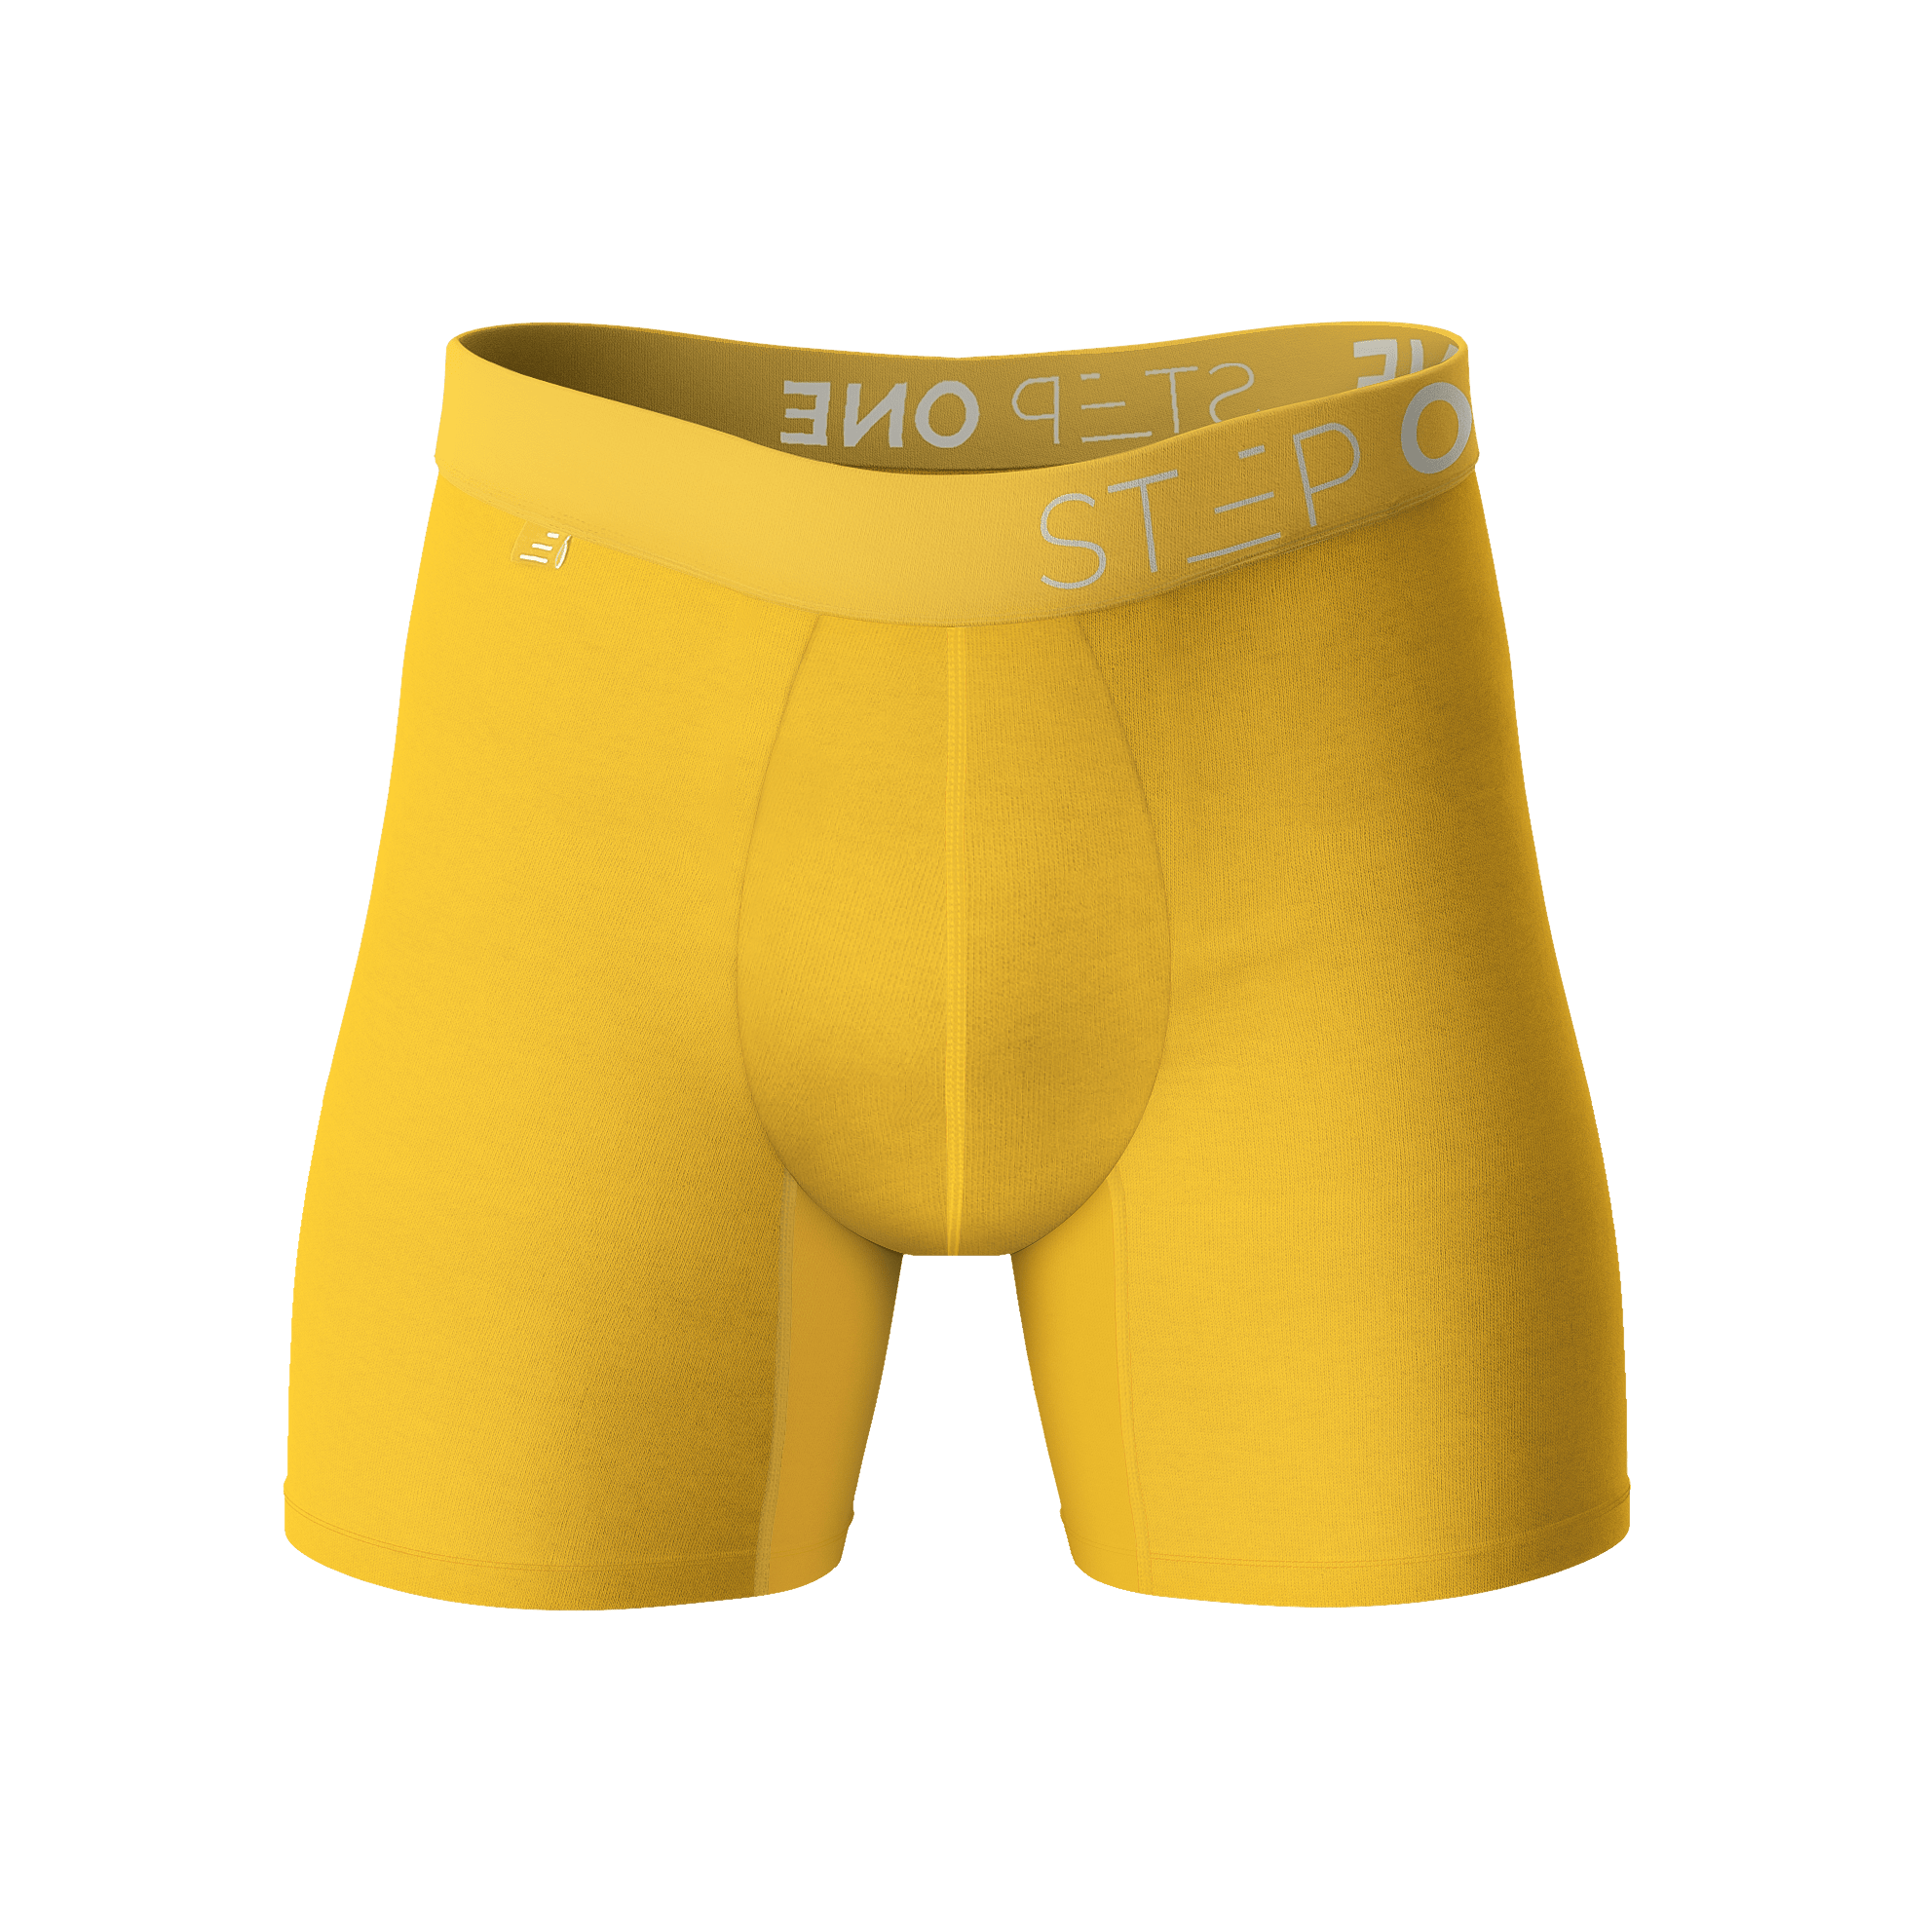 Boxer Brief - Cheeky Cheddars product